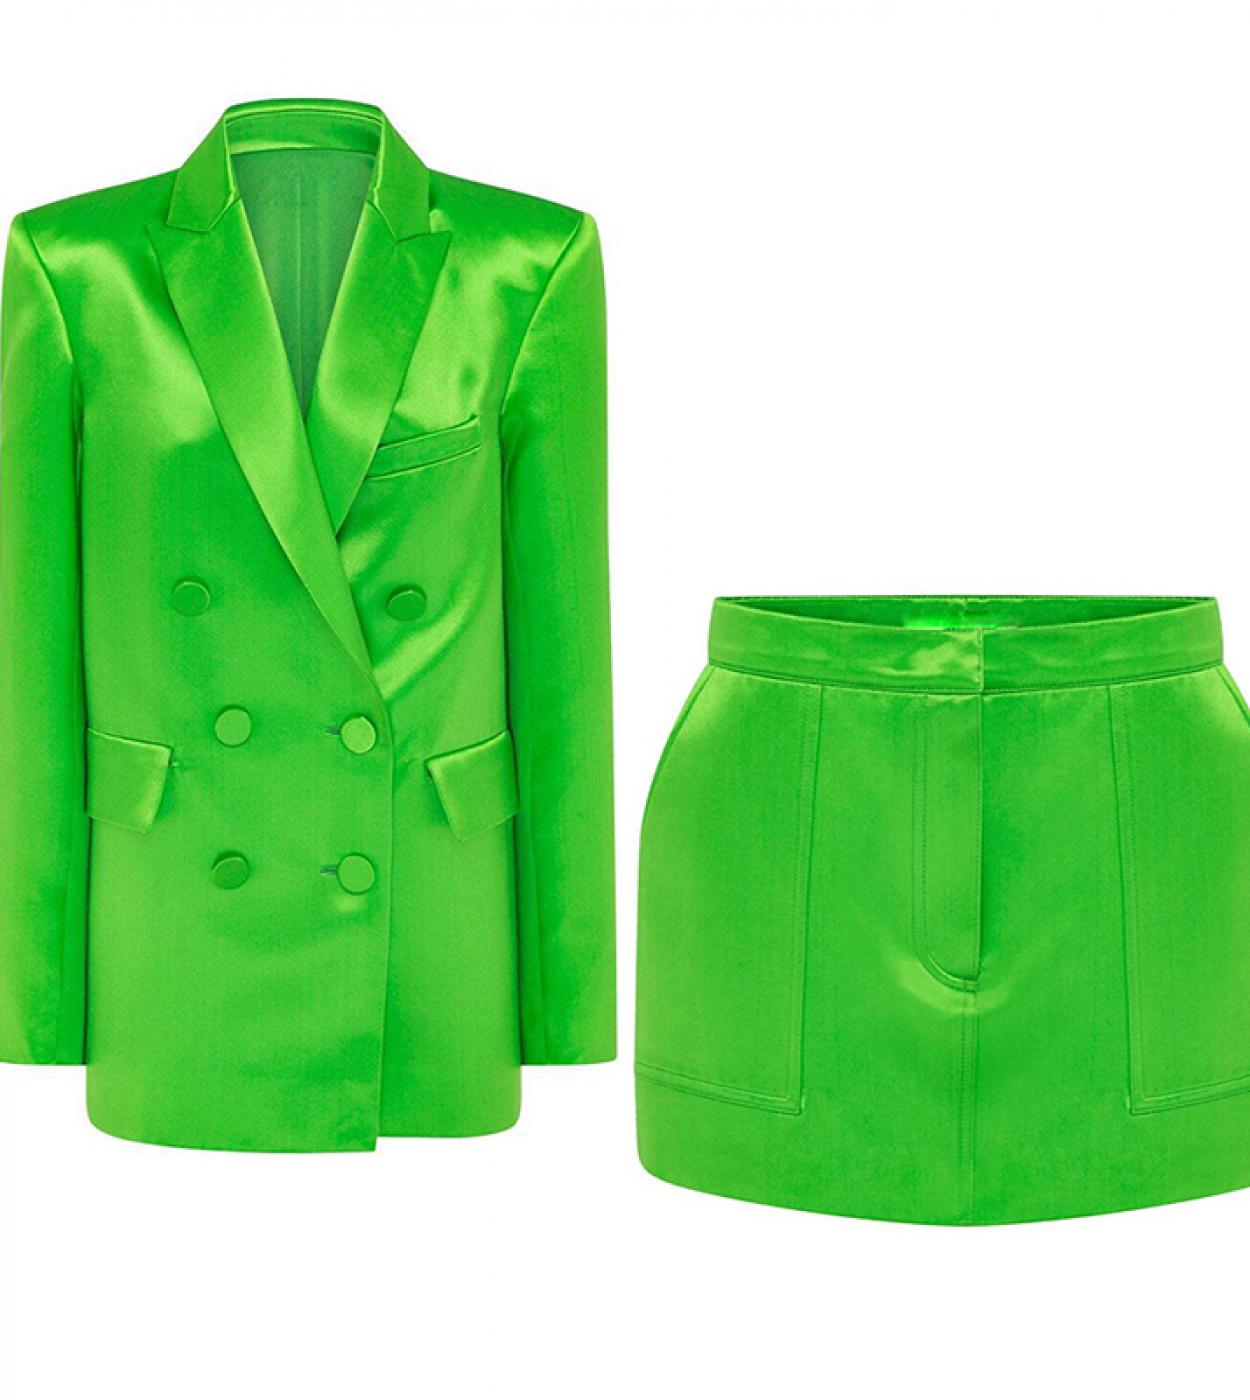 Skirt Blazer Suits Green Violet 2022 New Bright Satin Double Breasted Loose Jacket Mini Skirt Two Piece Sets Women High 